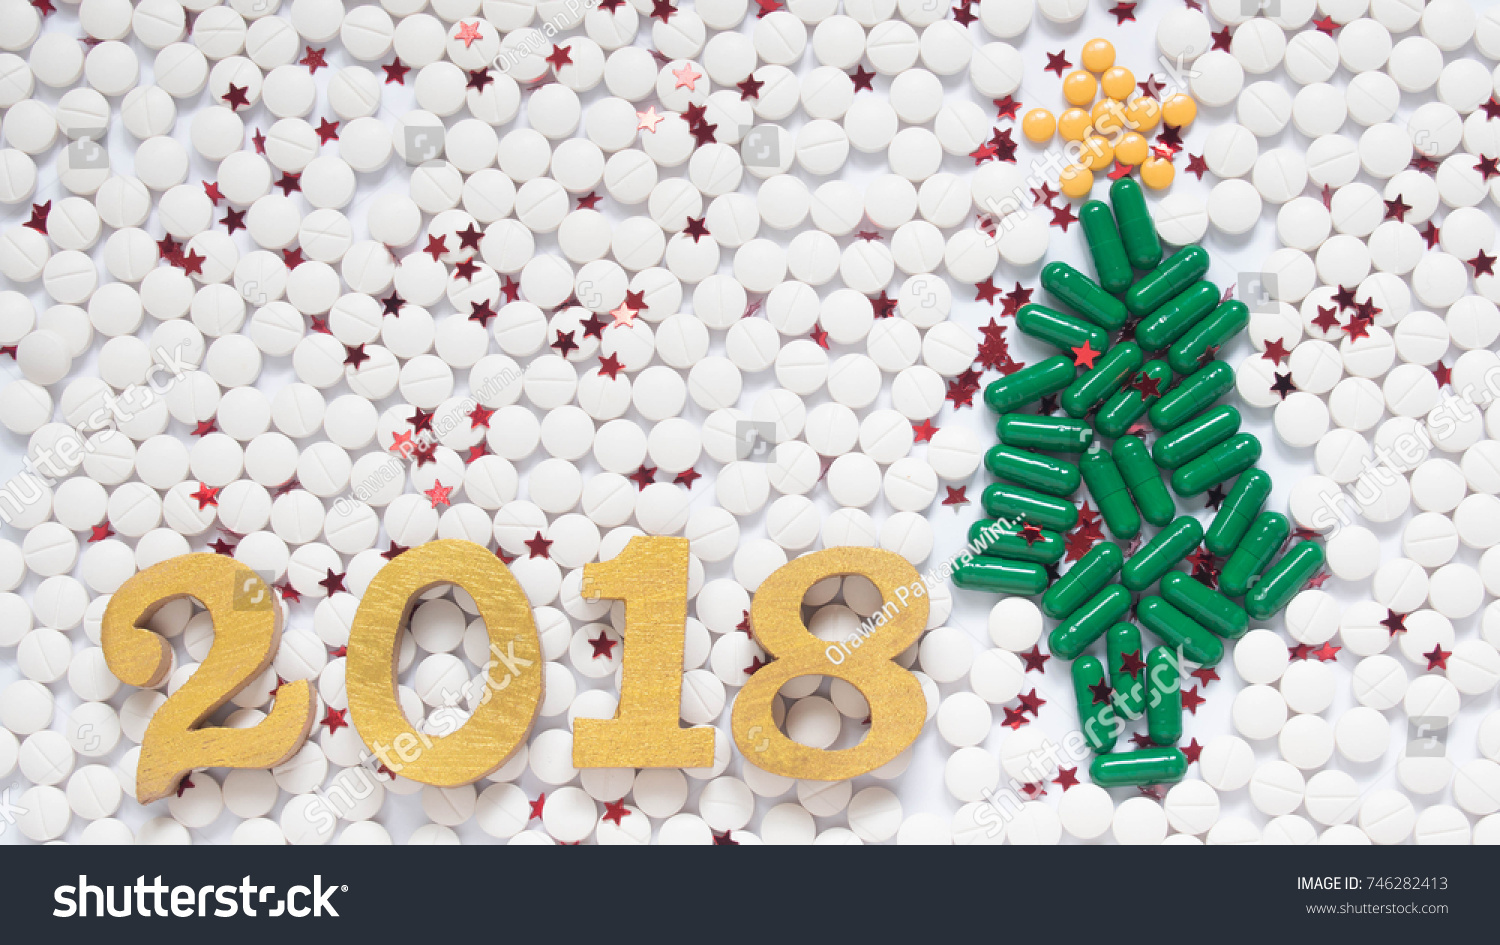 Happy New Year 2018 for medical and health concept Christmas tree made form green medical